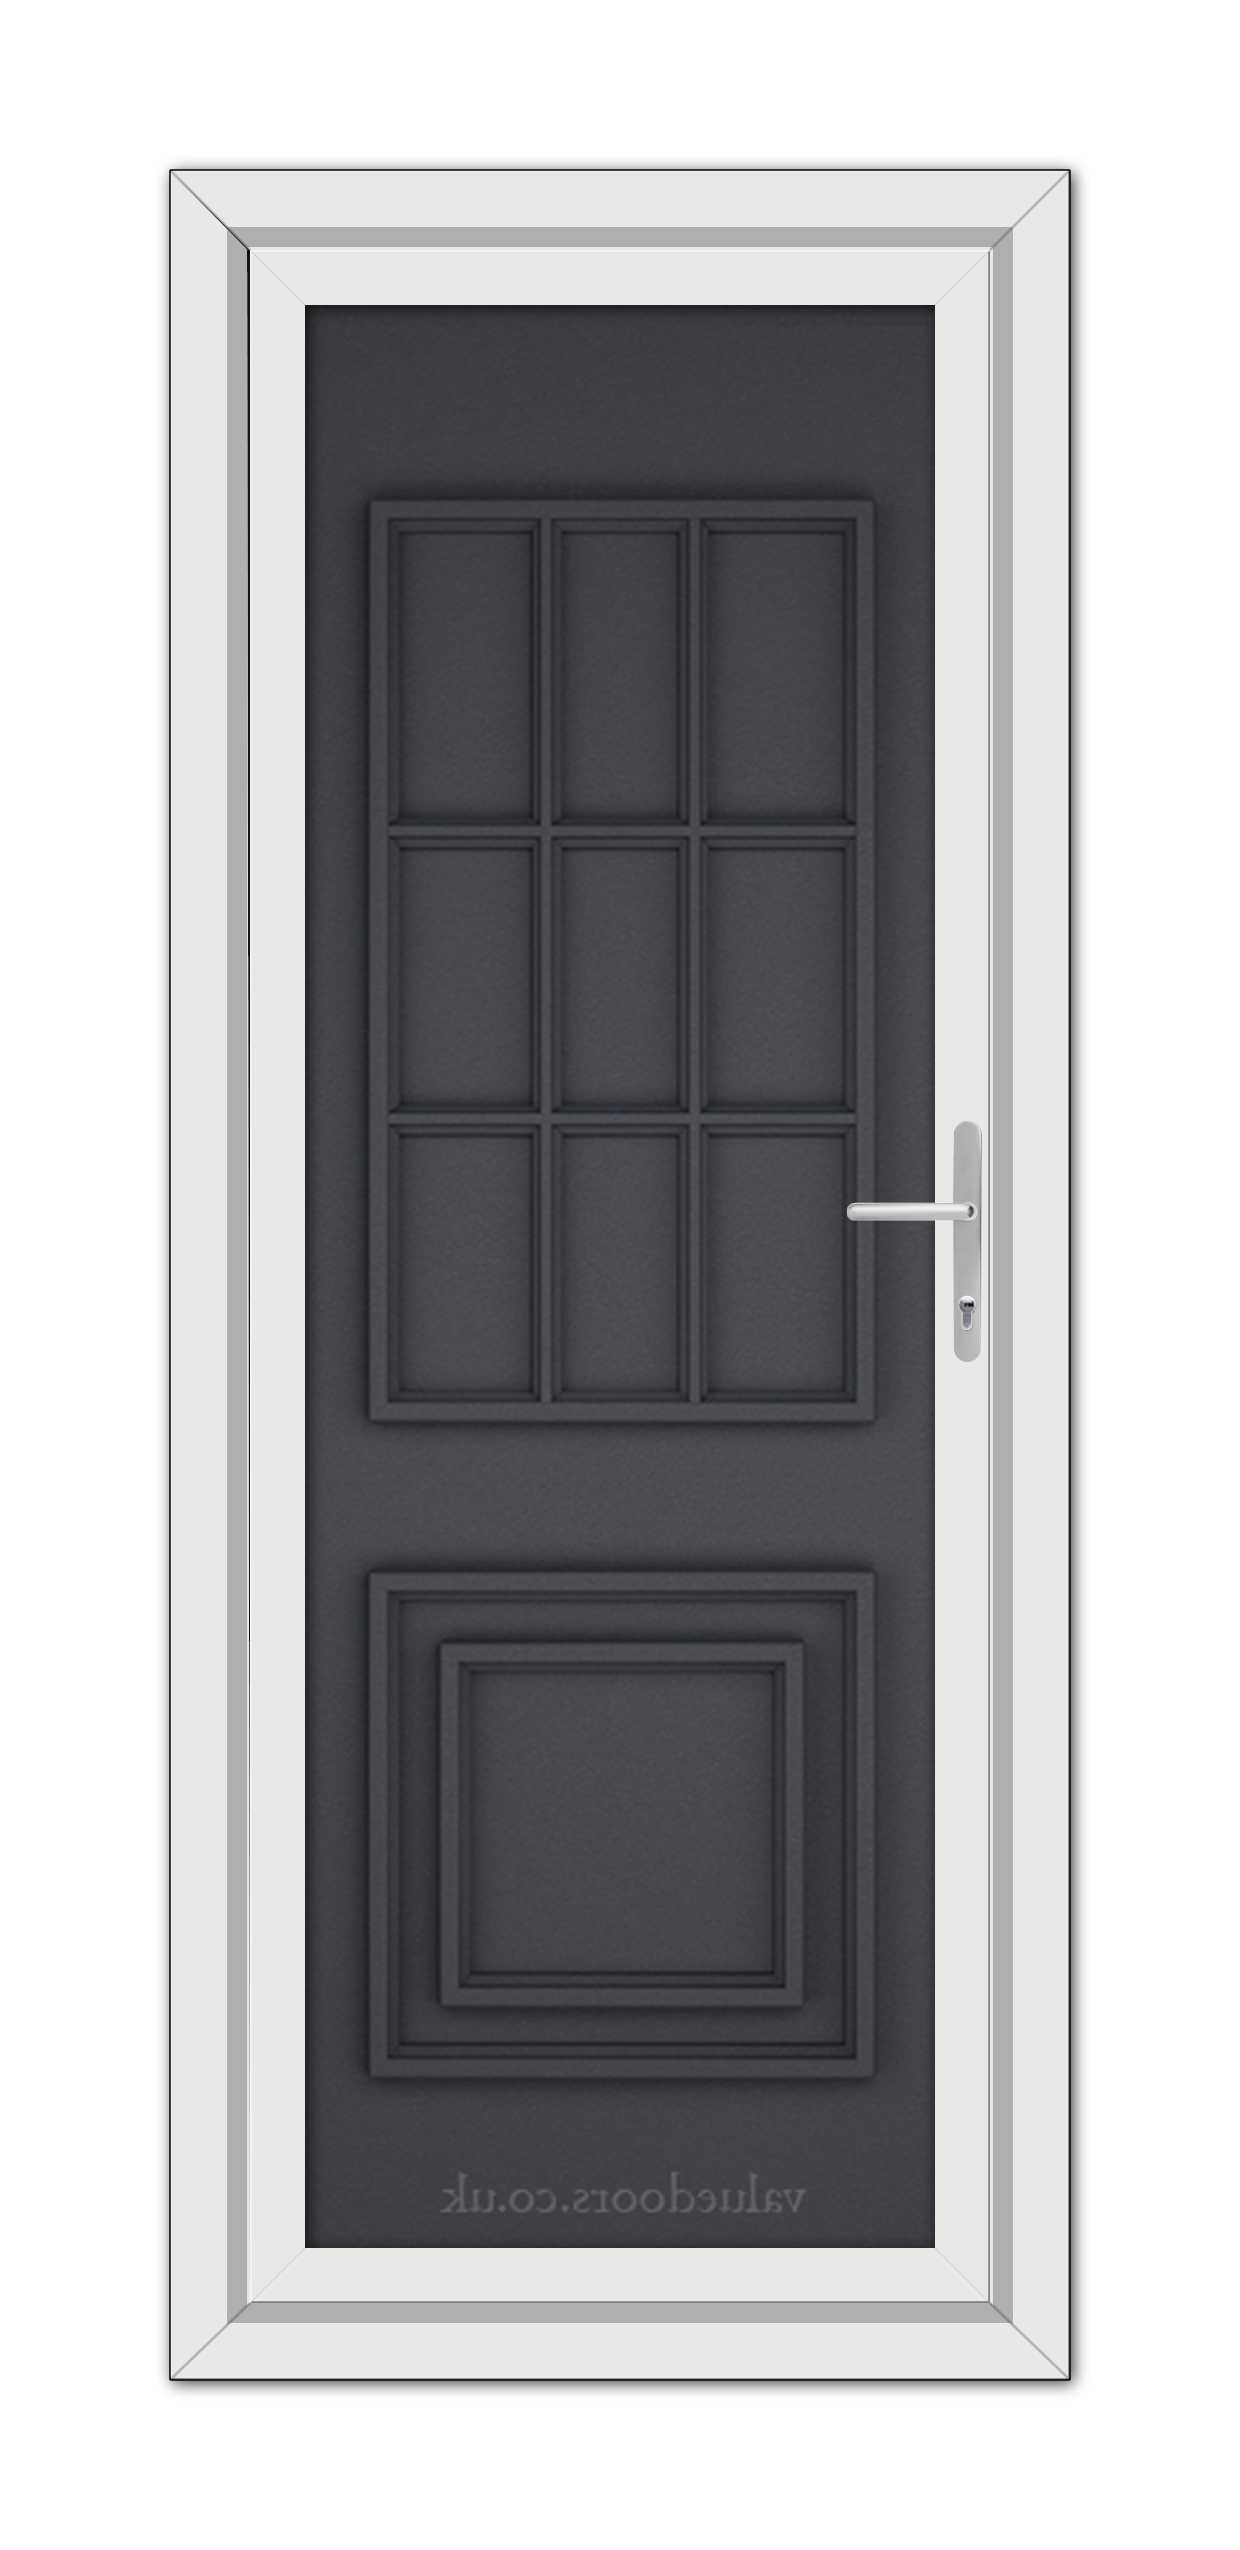 A modern Grey Grained Cambridge One Solid uPVC door with a metal handle, featuring a series of rectangular panels, framed by a white doorframe.